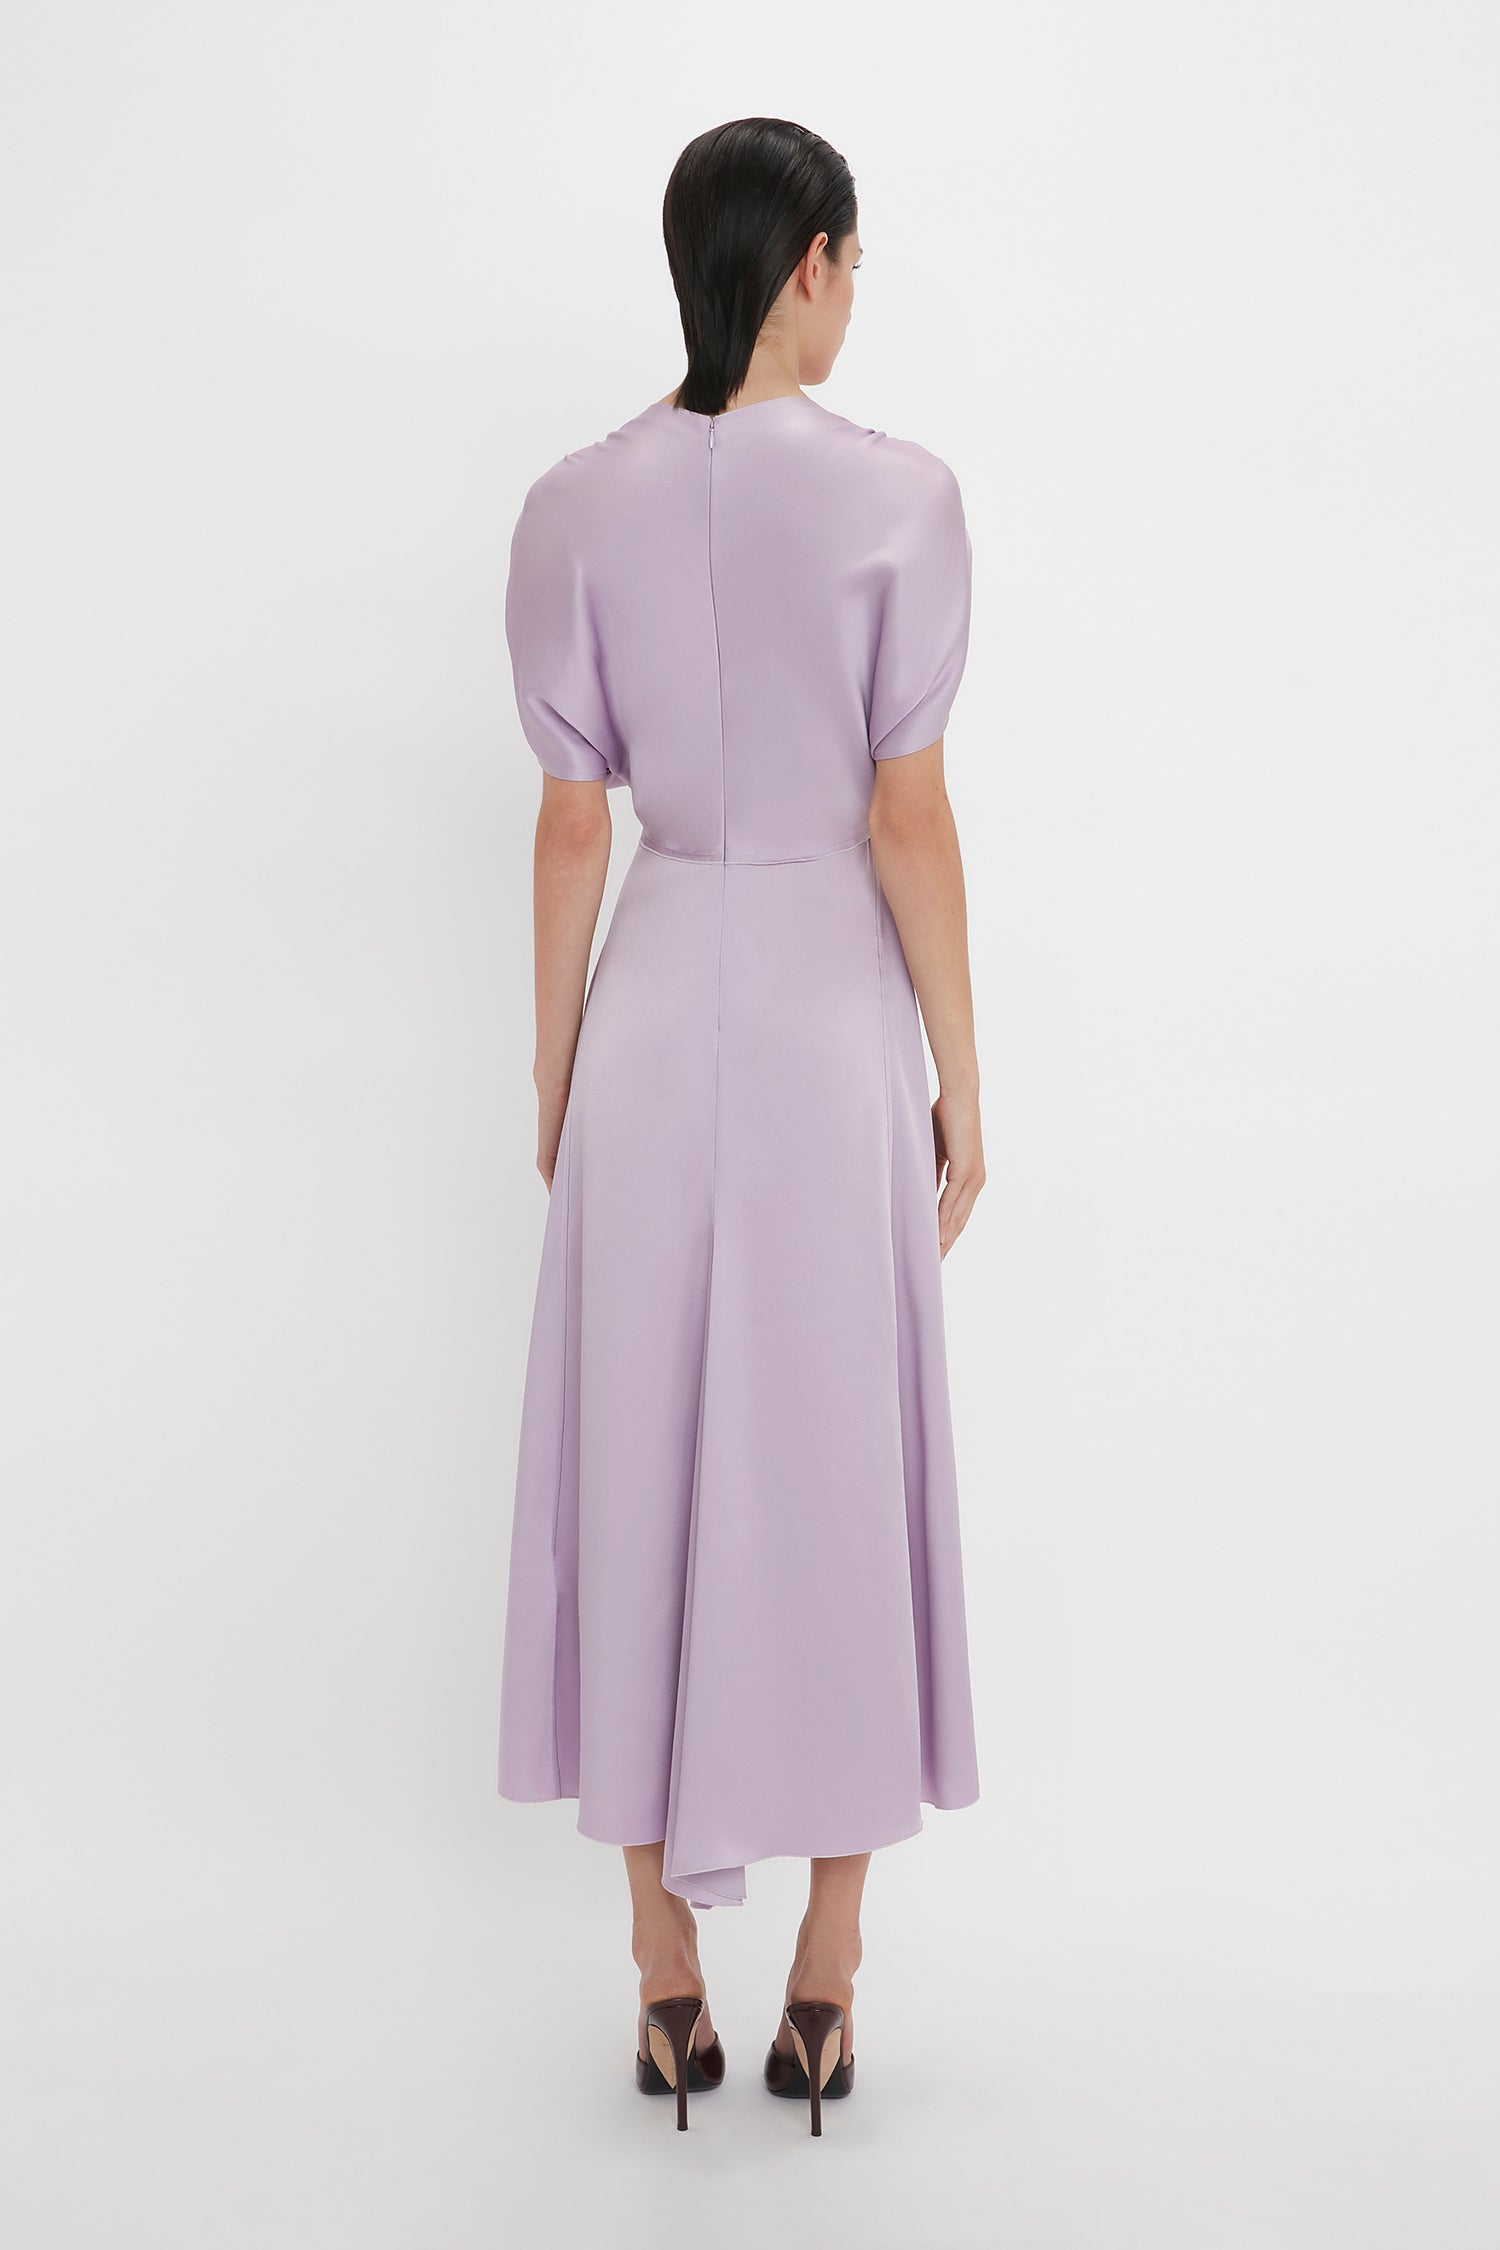 A person is standing facing away from the camera, wearing a Victoria Beckham V-Neck Ruffle Midi Dress In Petunia and black high-heeled shoes. The background is plain white, adding to the elegance reminiscent of Victoria Beckham's timeless style.